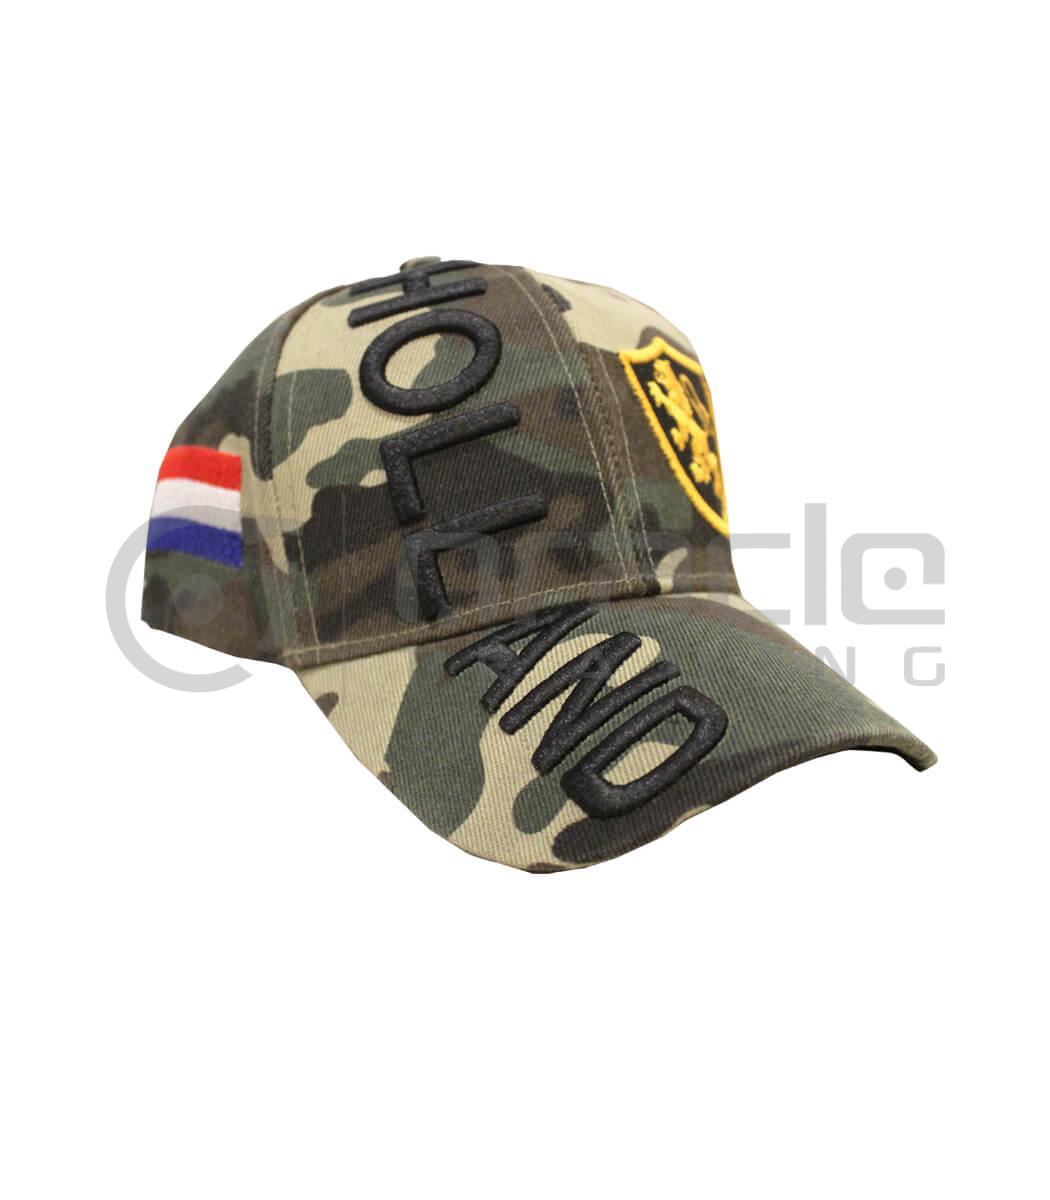 Holland Classic Hat – Oracle Trading Inc.